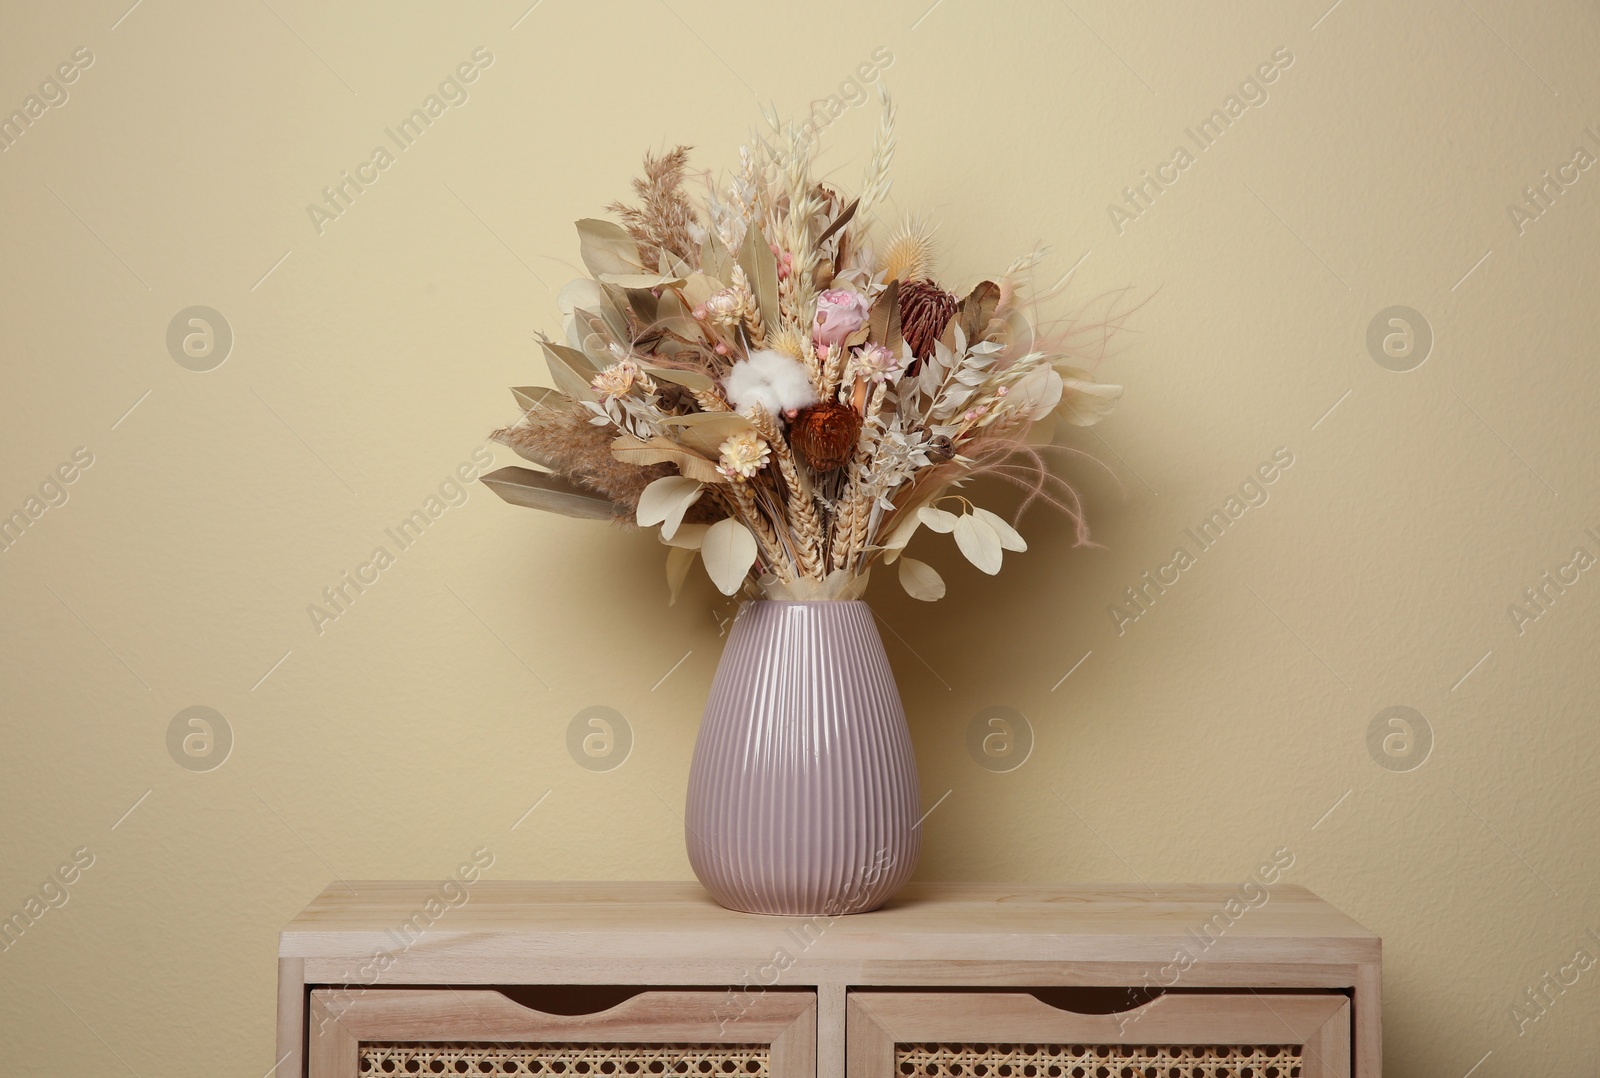 Photo of Beautiful dried flower bouquet in ceramic vase on wooden table near beige wall